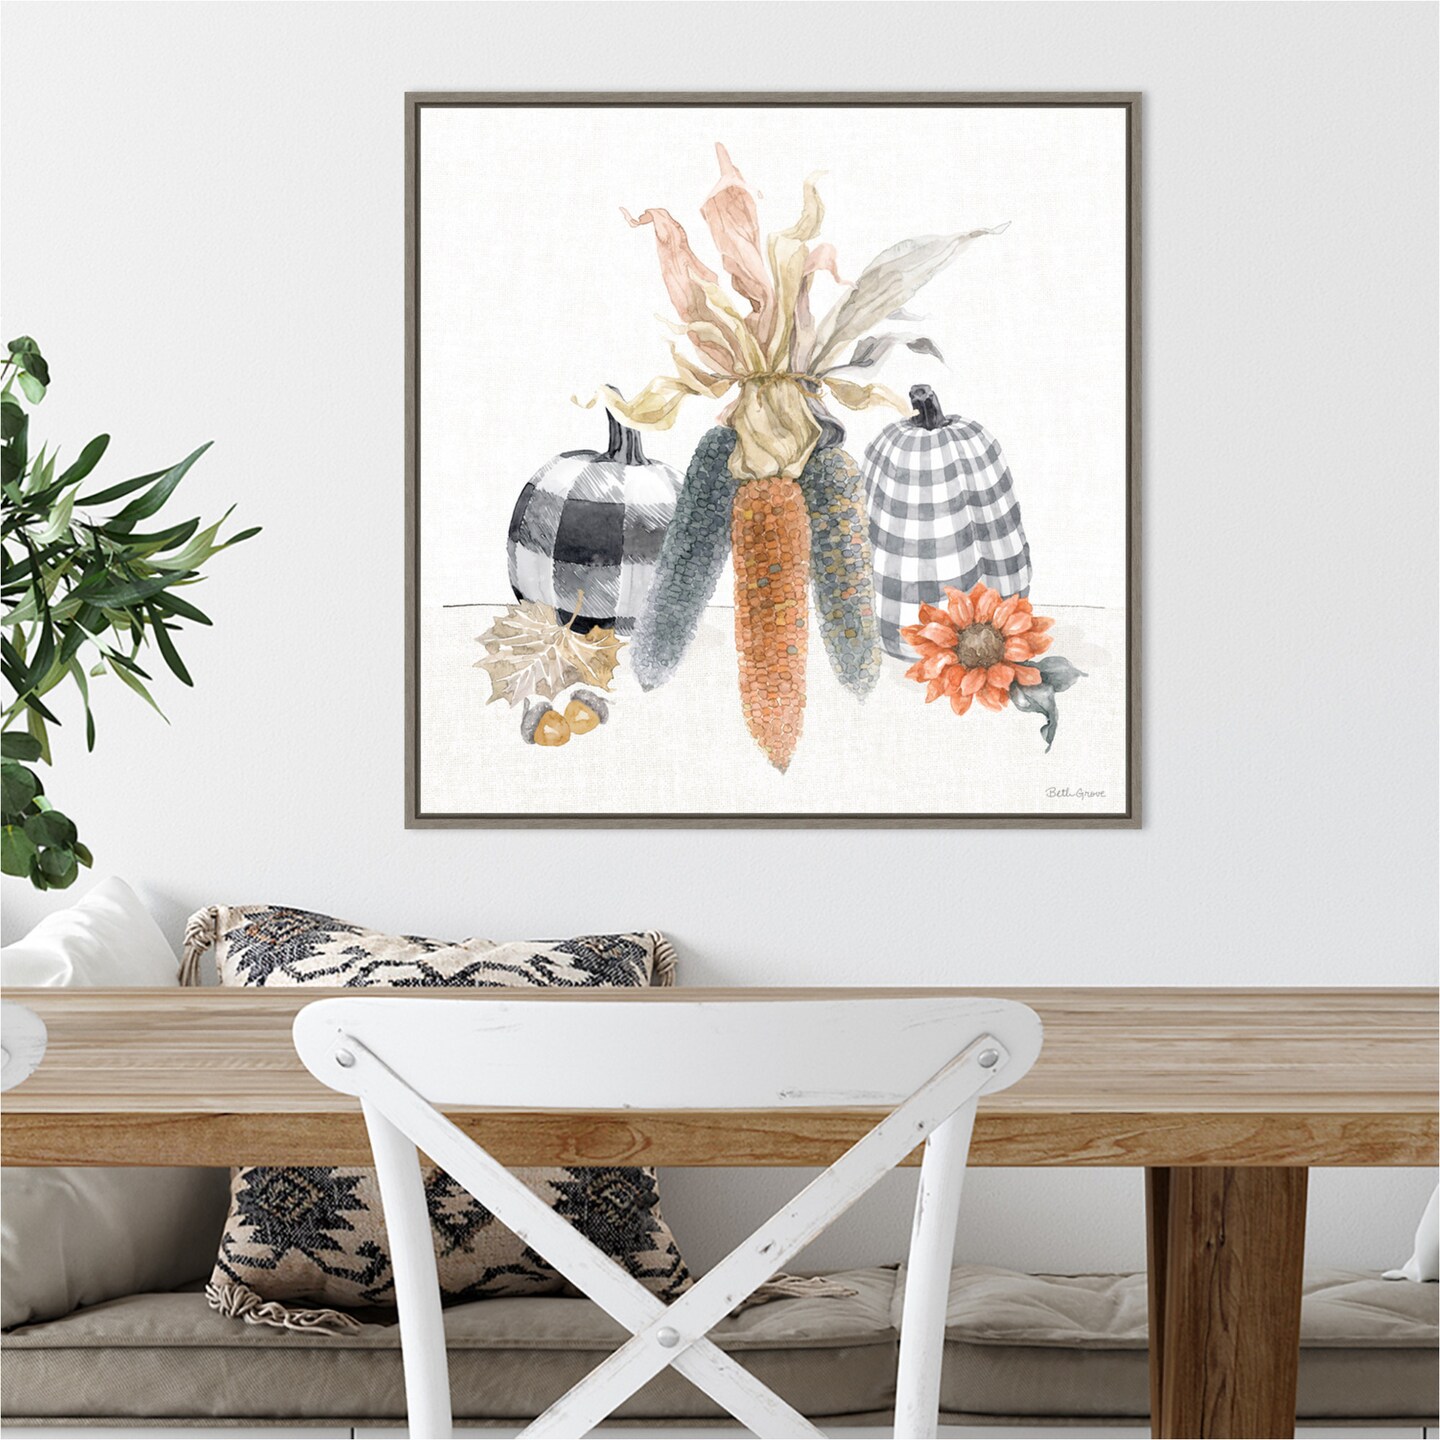 Harvest Classics X by Beth Grove 22-in. W x 22-in. H. Canvas Wall Art Print Framed in Grey